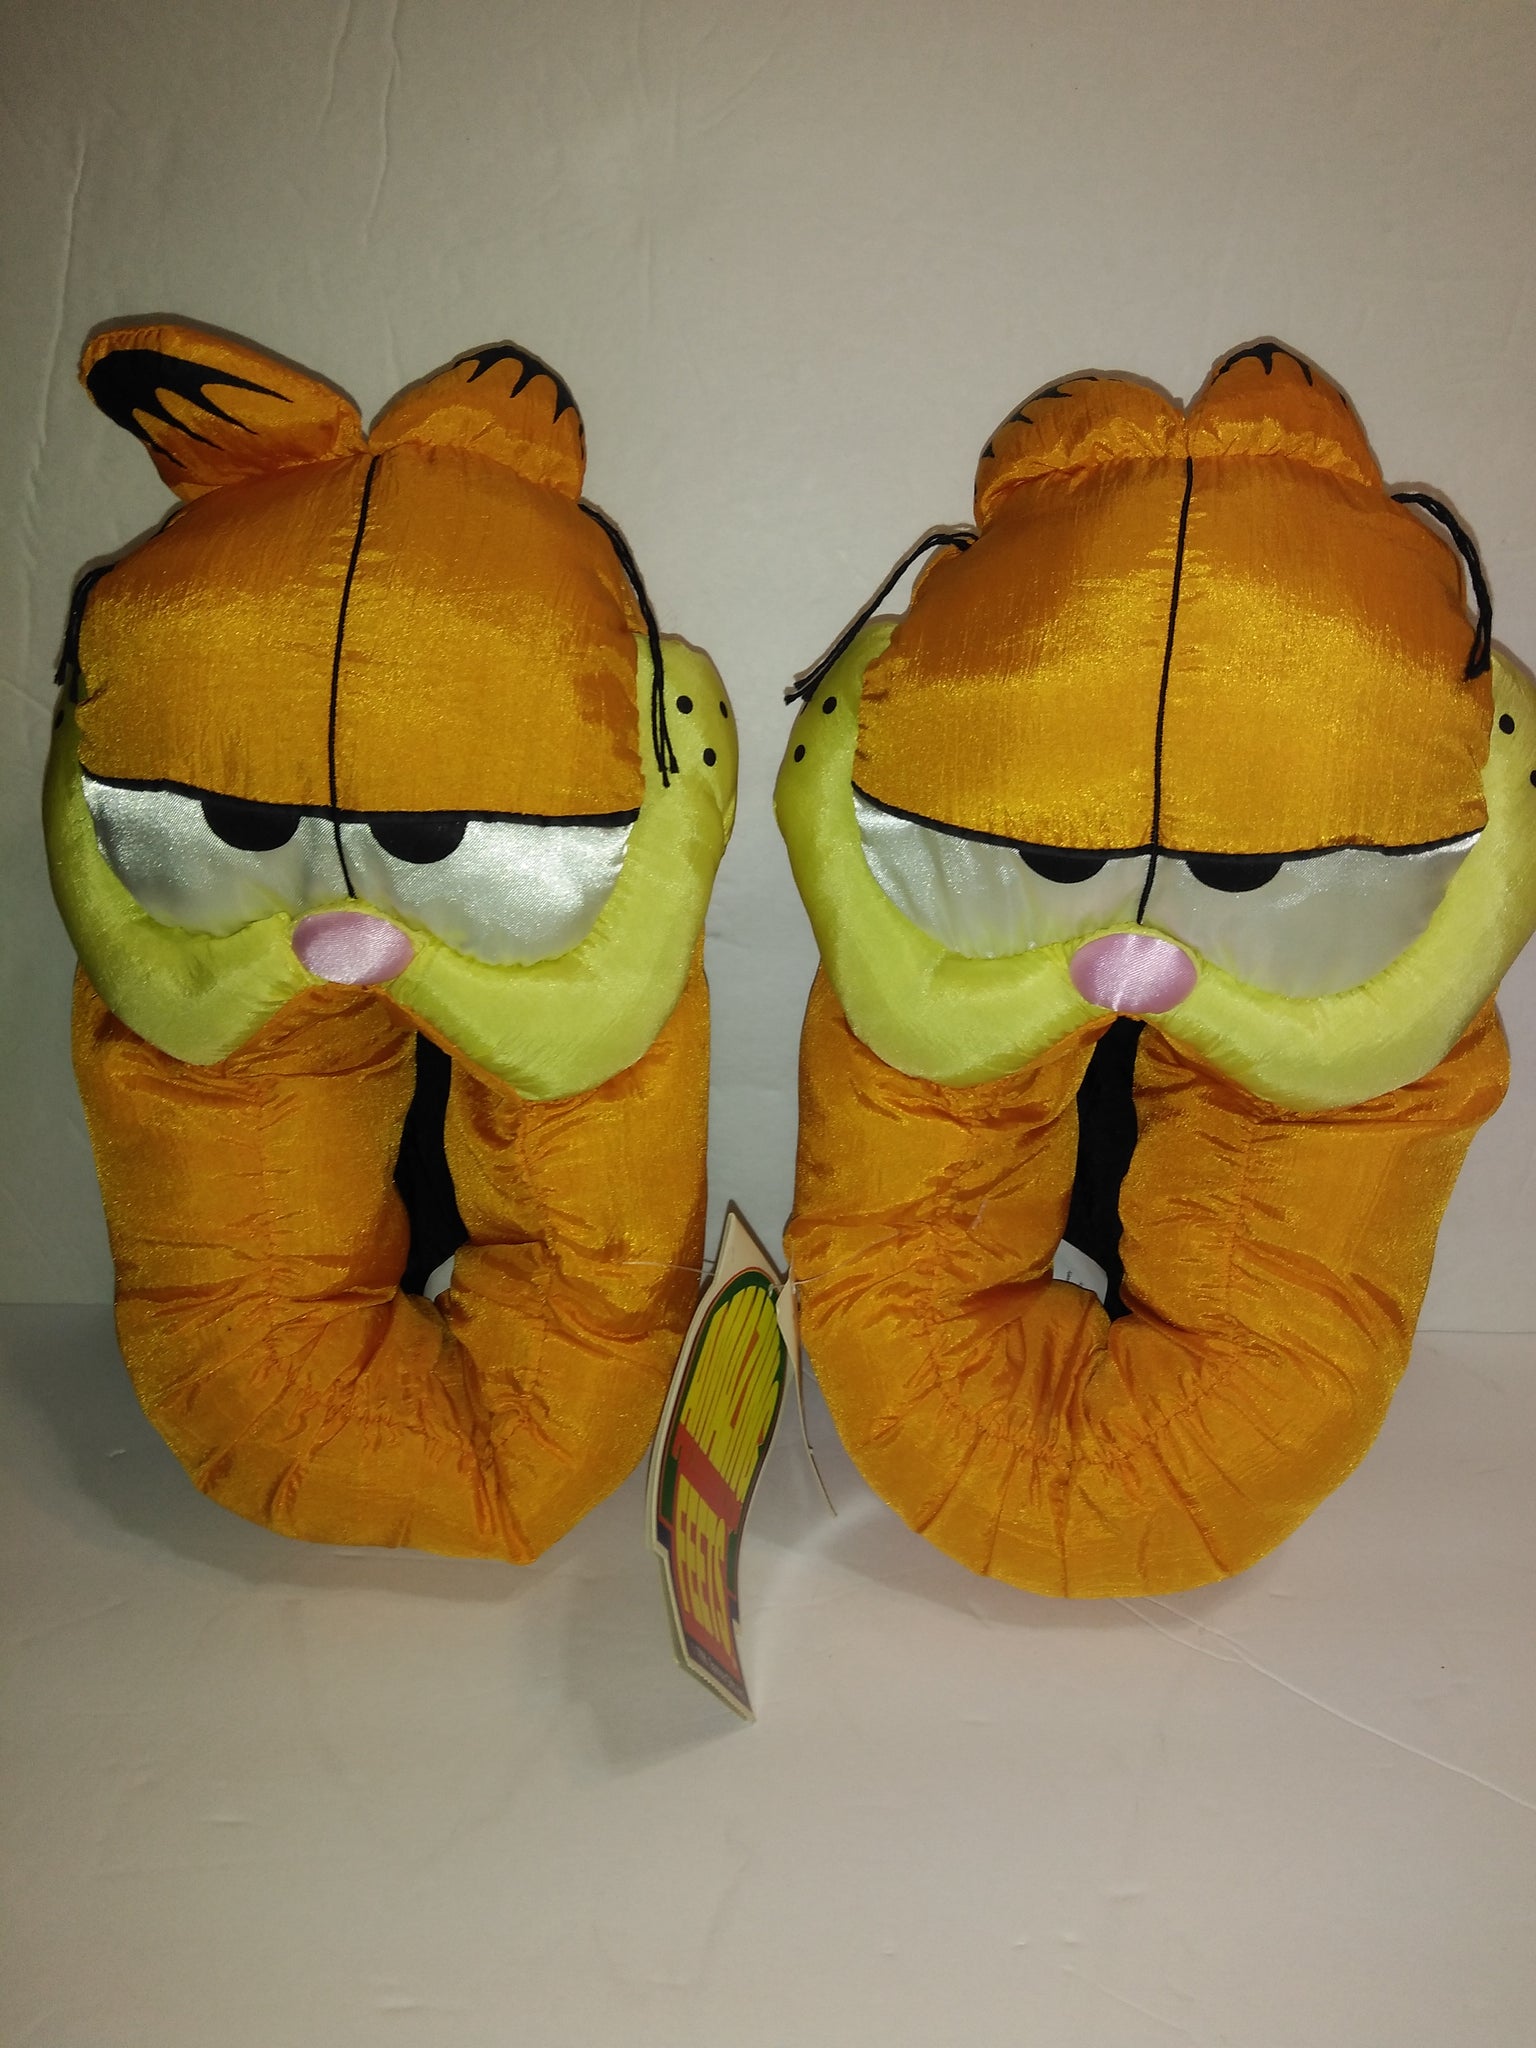 Vintage Garfield Plush Slippers Satin Exclusively From Spencer | eBay